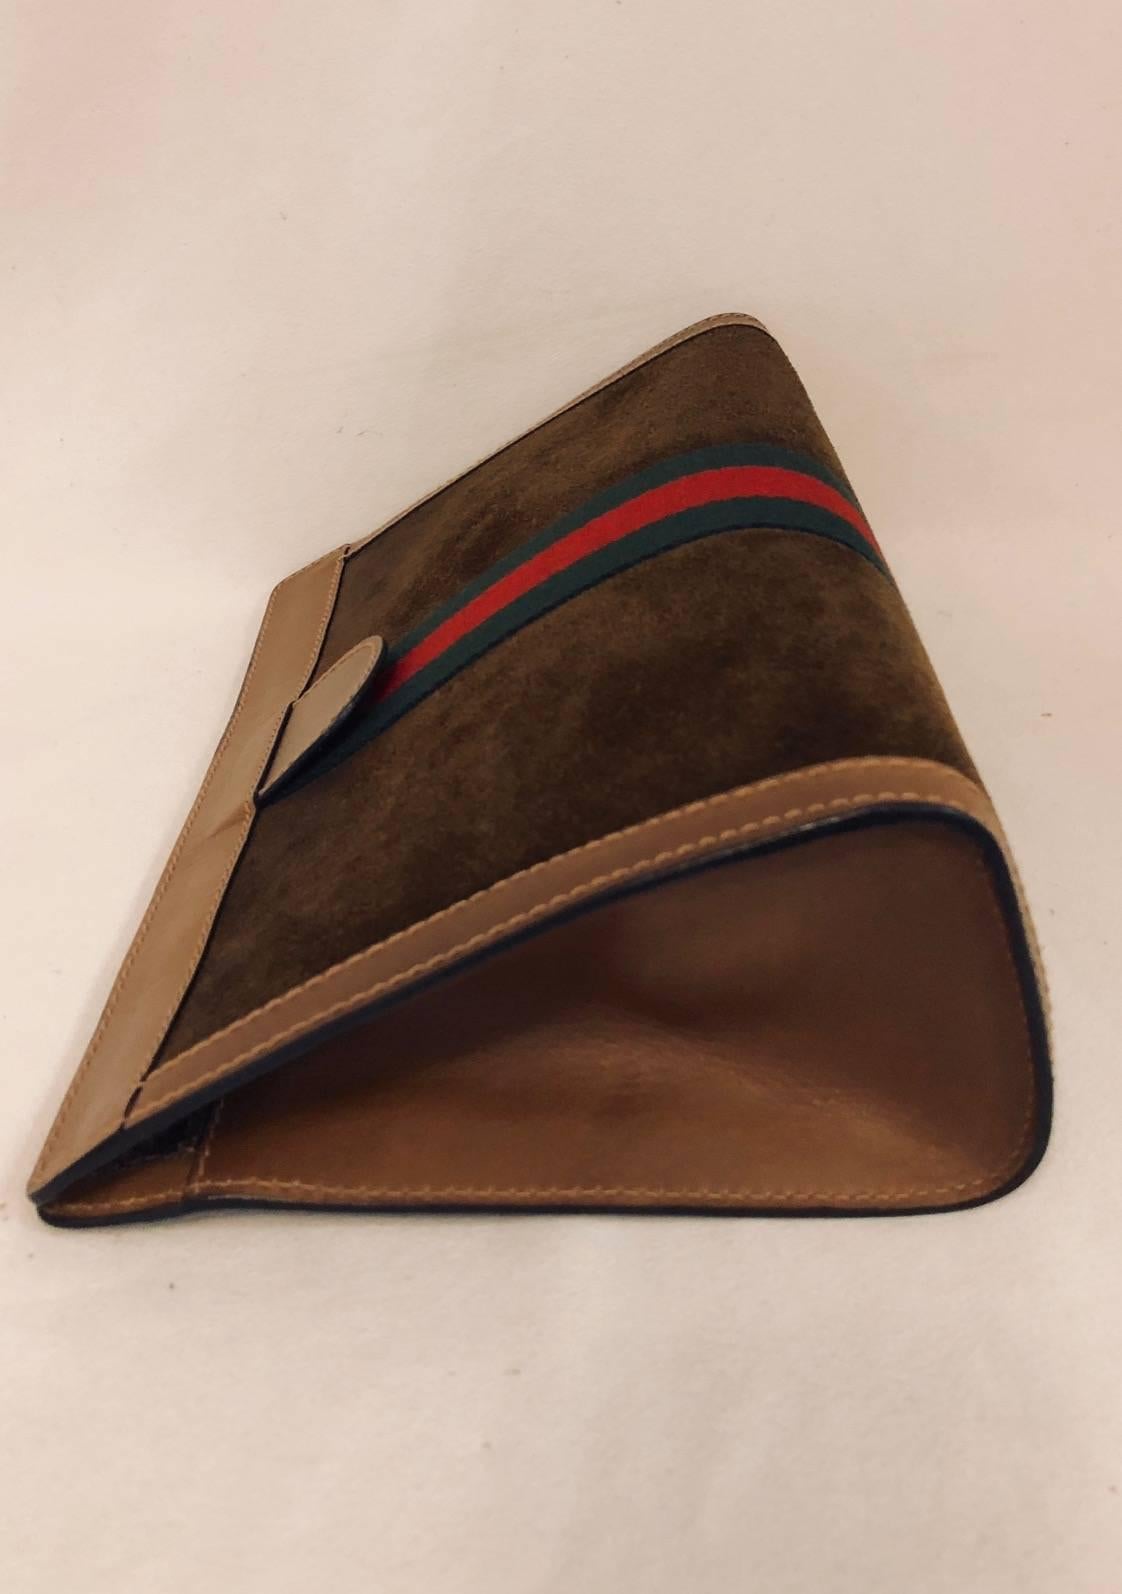 Substantial enough to carry as a clutch, this vintage brown suede cosmetic bag is a must for any connoisseur of Gucci leather goods in general and handbags in particular!  Features triangular shape, tan leather trim and sides, signature green and